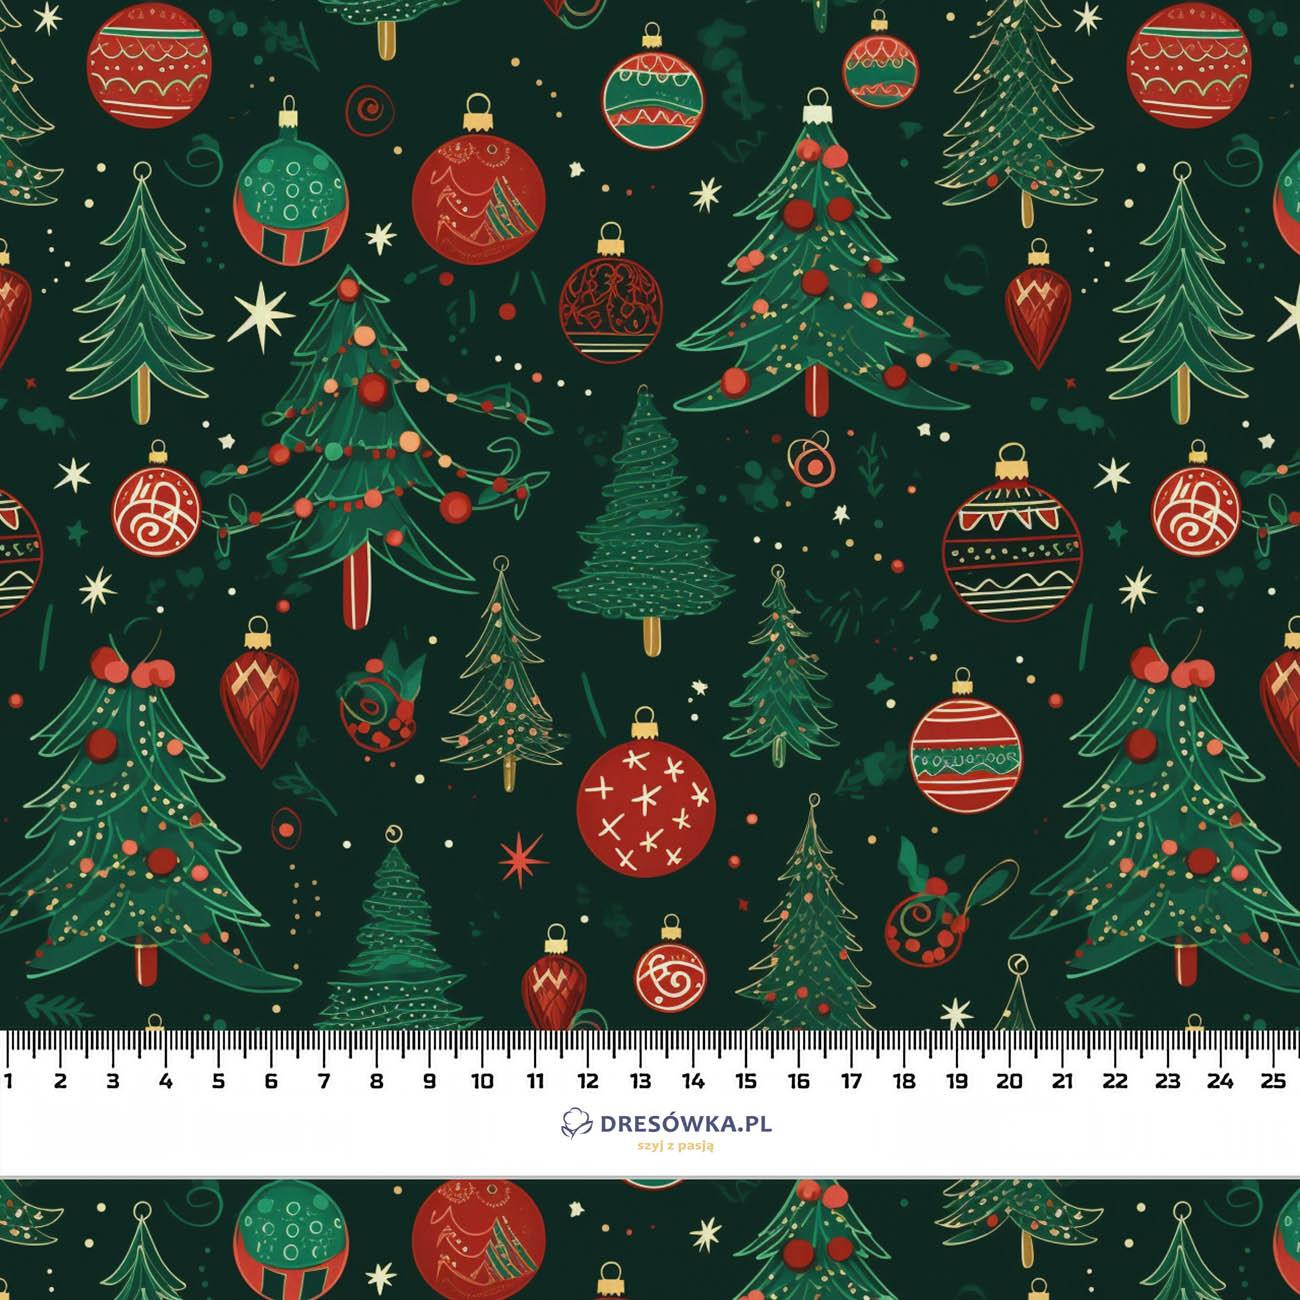 CHRISTMAS TREE PAT. 3 - Woven Fabric for tablecloths